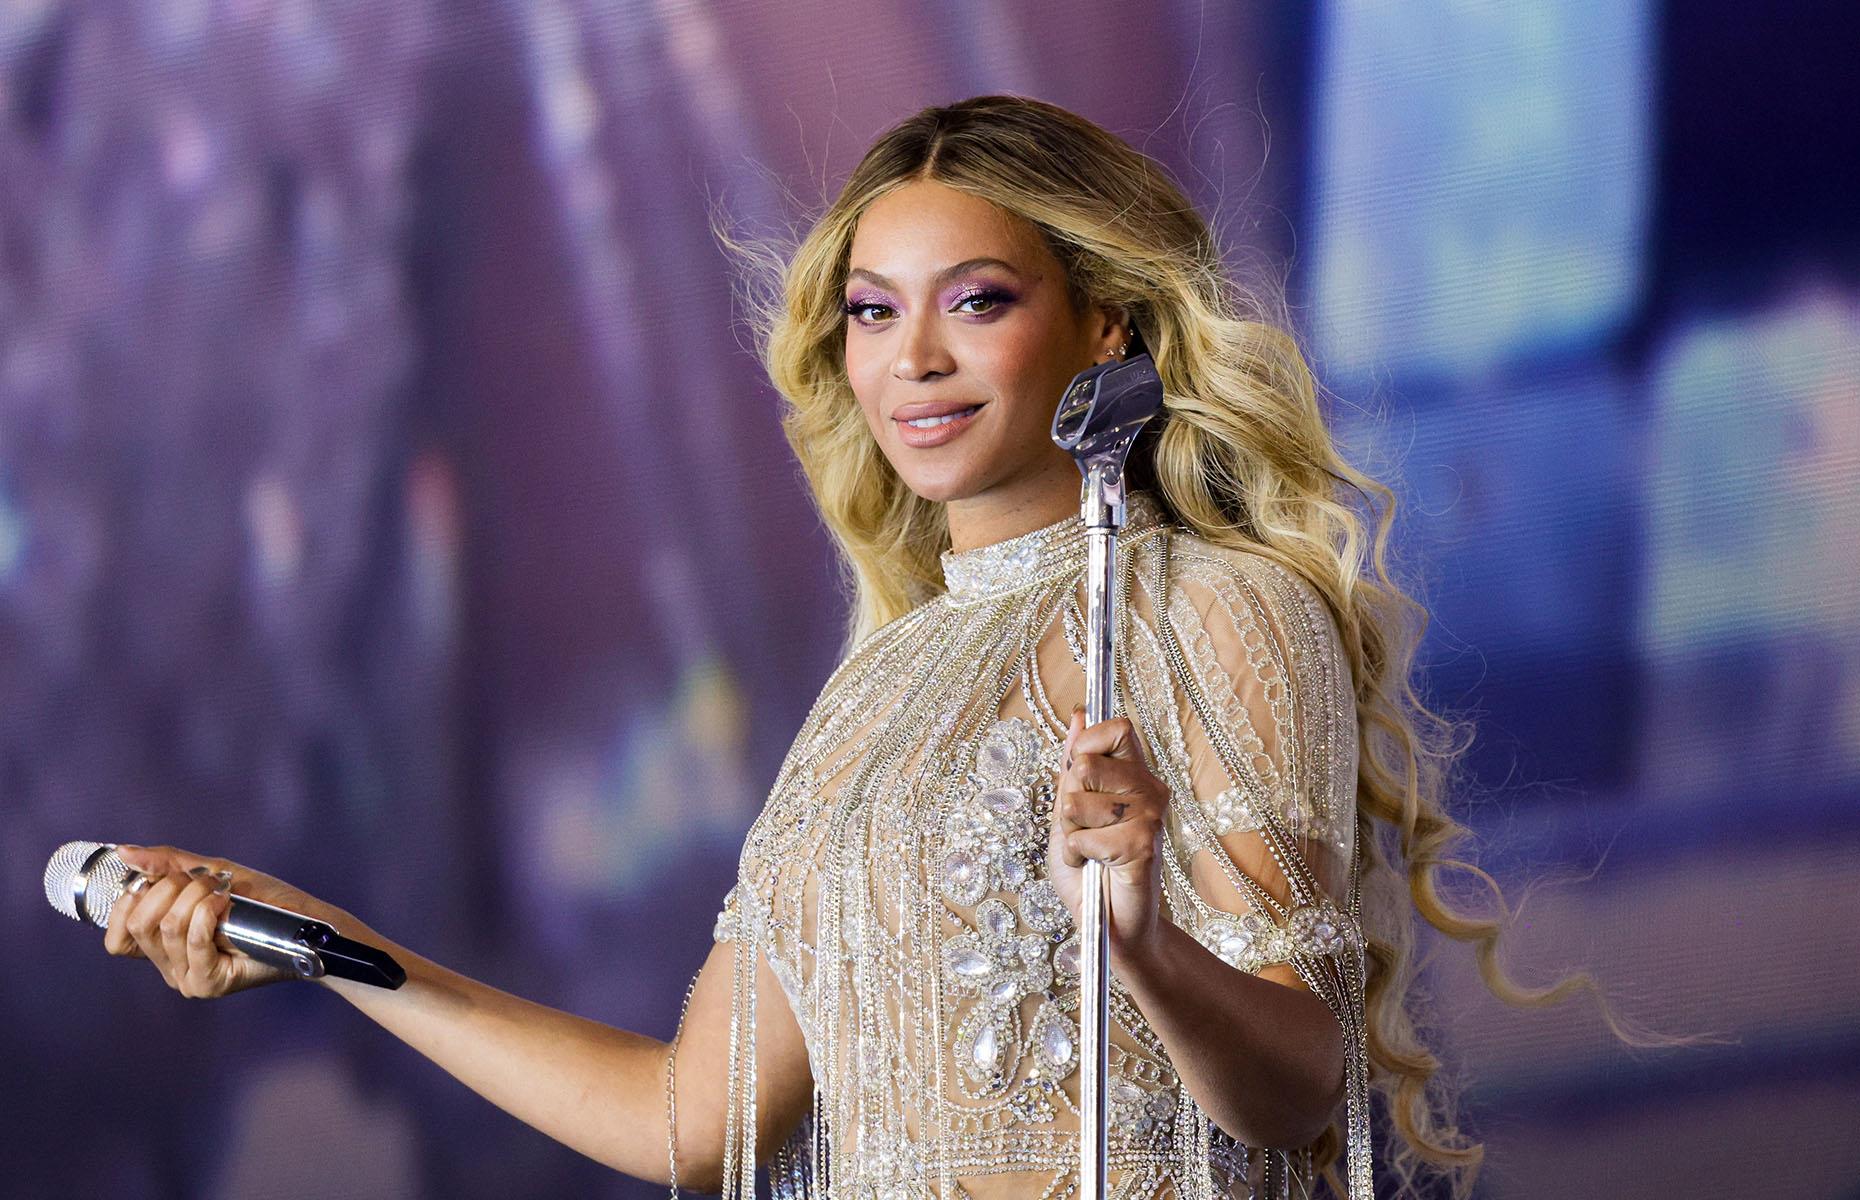 <p>Beyoncé's <em>Renaissance World Tour</em> was a massive money spinner in 2023, becoming the highest-grossing tour by a Black artist in history. The <em>Single Ladies</em> singer surpassed legendary acts like Michael Jackson, Tina Turner, and even her husband Jay-Z to claim the prestigious title.</p>  <p>The tour was a sellout success, with 2.8 million tickets snapped up for 56 shows across North America and Europe. It grossed a grand total of $580 million, which translates to a juicy $606 million in today's money. </p>  <p>During these epic three-hour extravaganzas, Queen Bey treated fans to a performance of her critically acclaimed <em>Renaissance</em> album in its entirety, as well as a curated selection of her biggest hits, including the iconic R&B anthem <em>Crazy in Love</em><em>.</em></p>